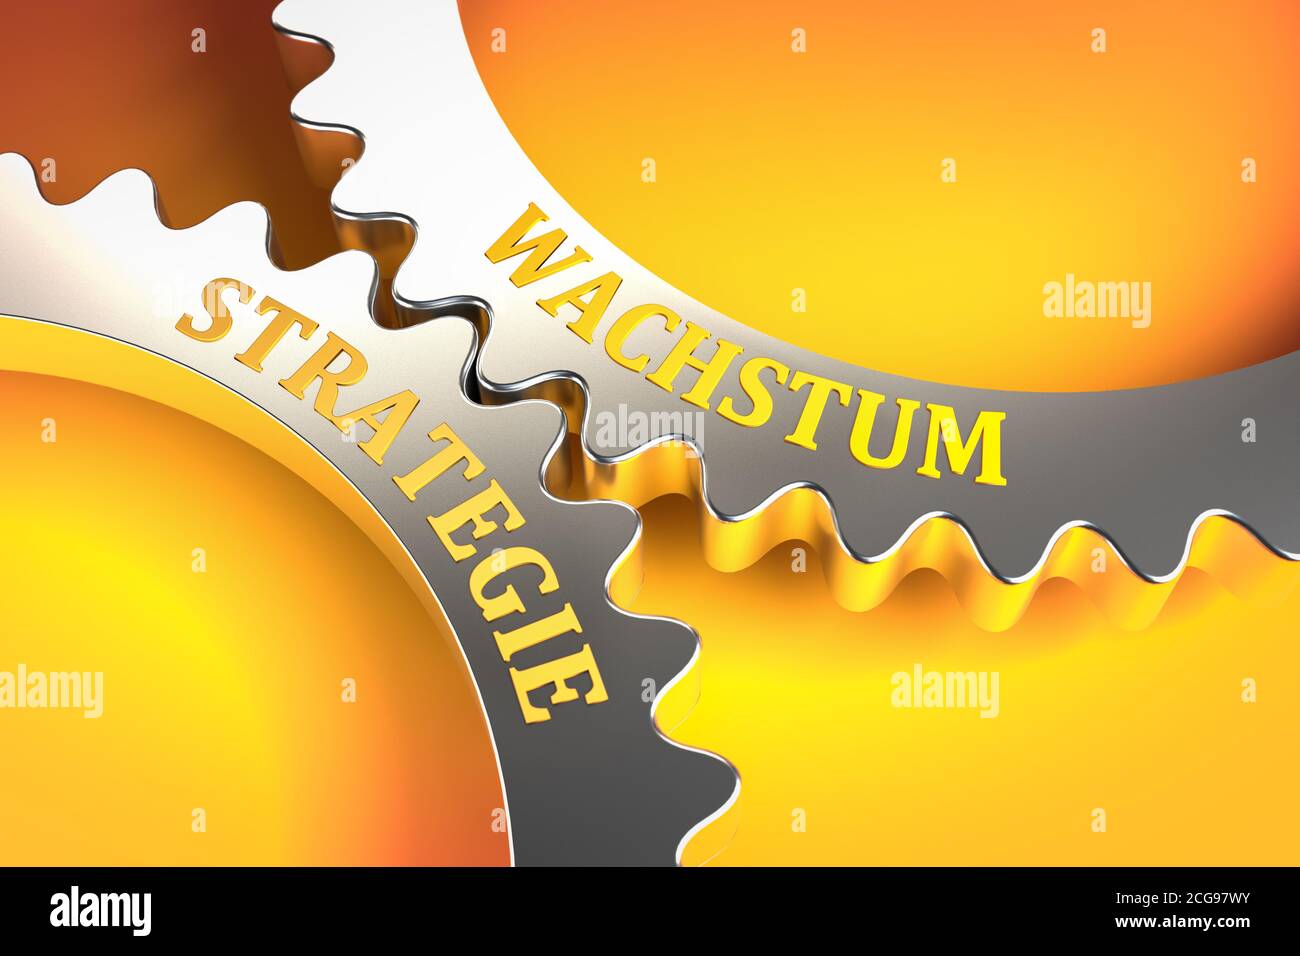 Business Concept: Strategy Growth. A good strategy leads to growth. Gears fitting into each other. Metaphor. German Language: Strategie Wachstum Stock Photo